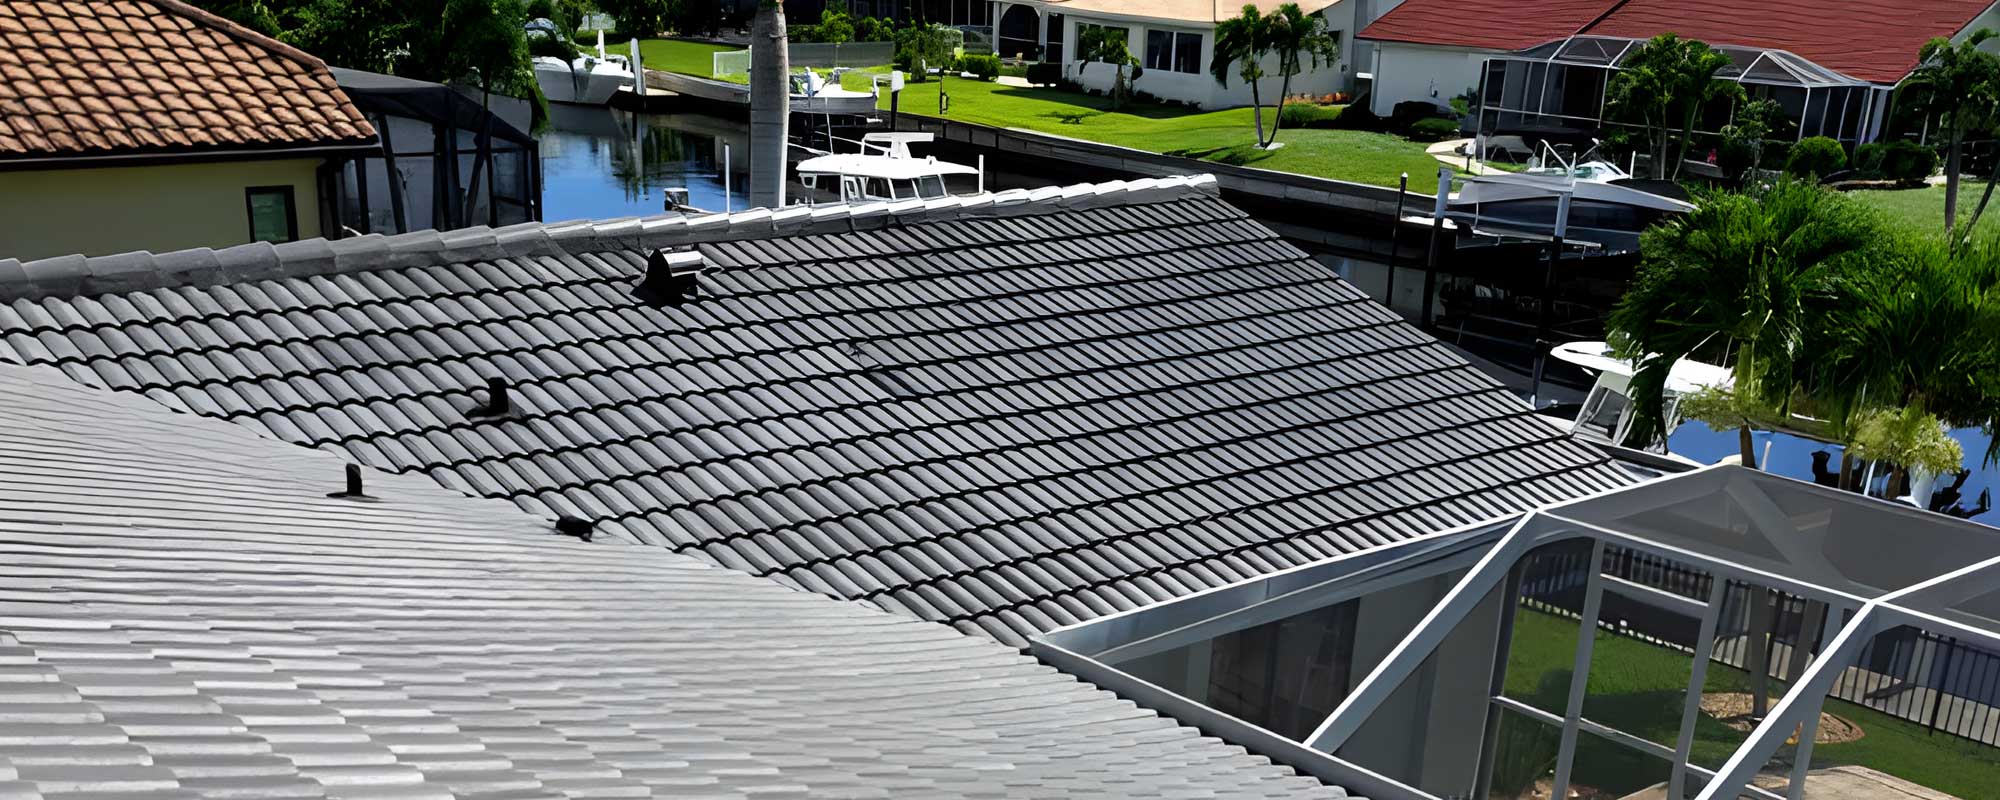 What are the methods of roof construction